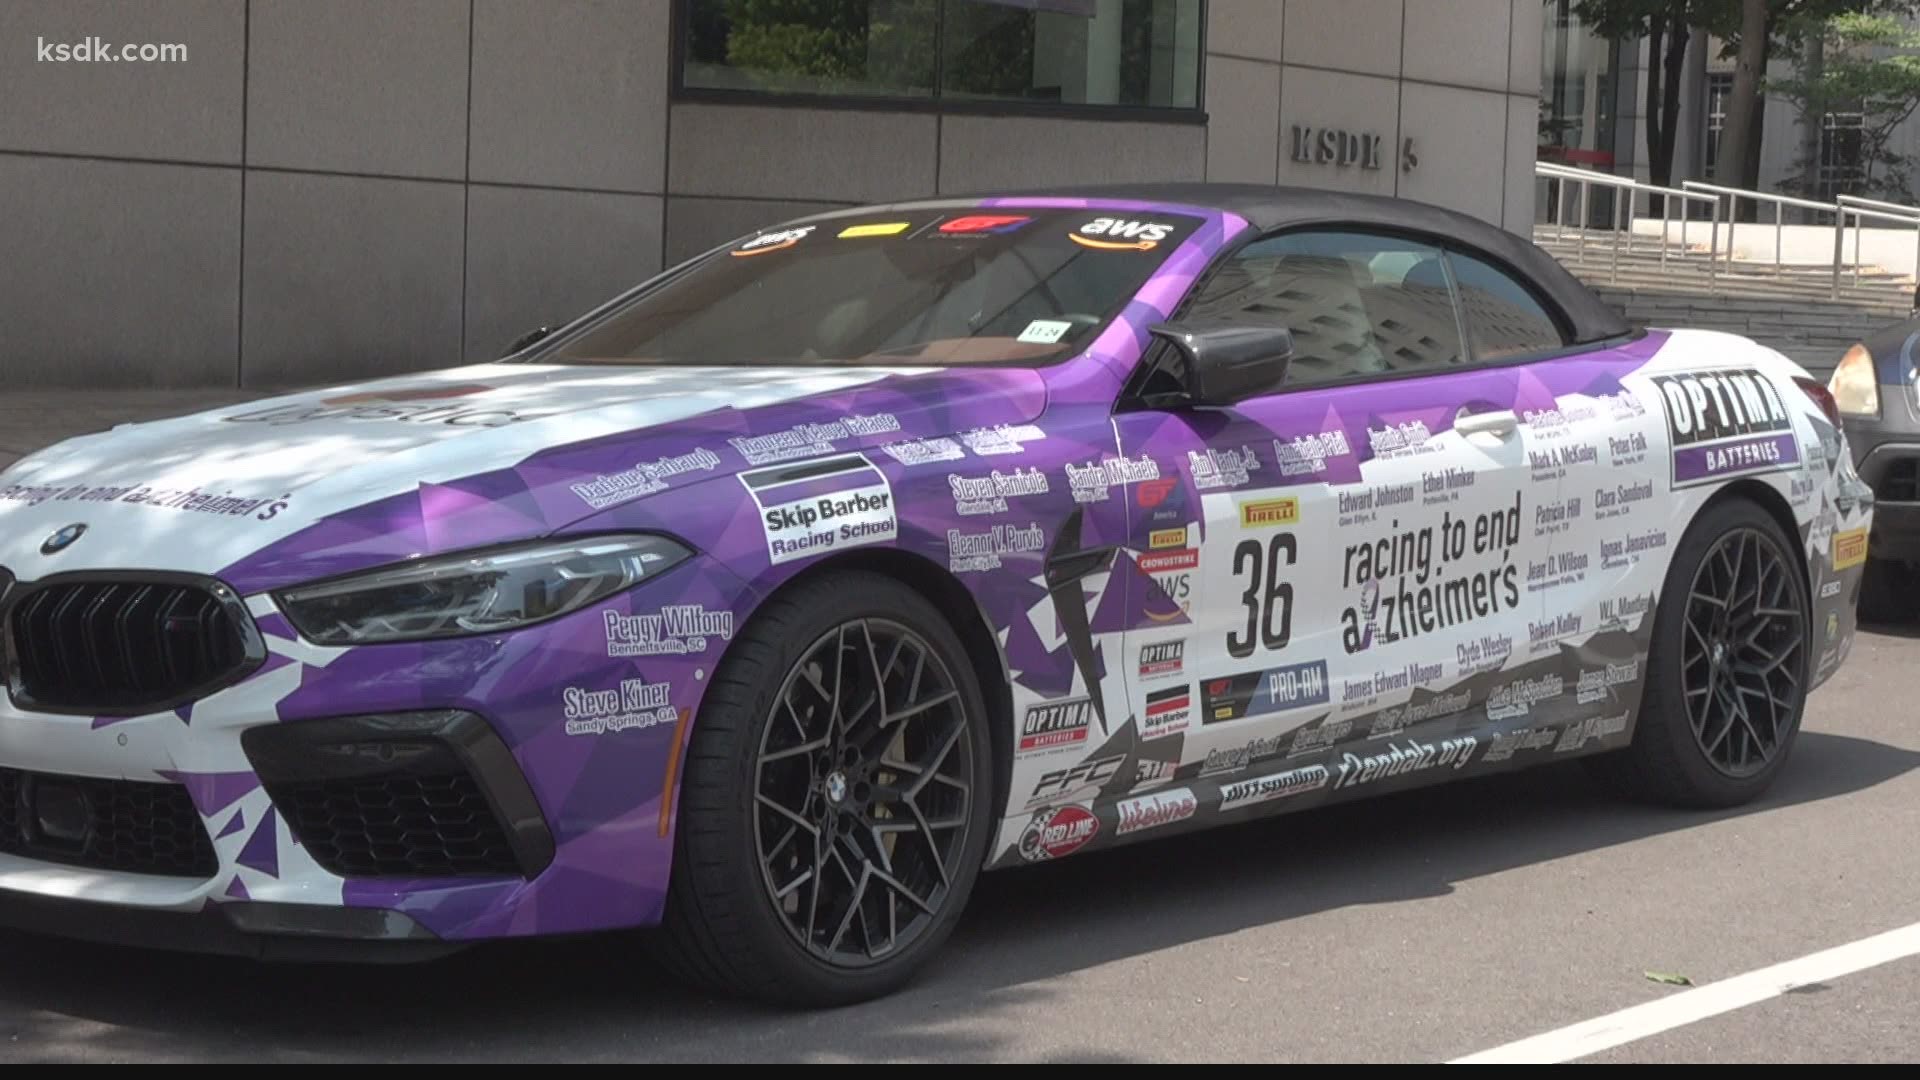 Racing to end Alzheimer's has raised more than $400,000 so far.